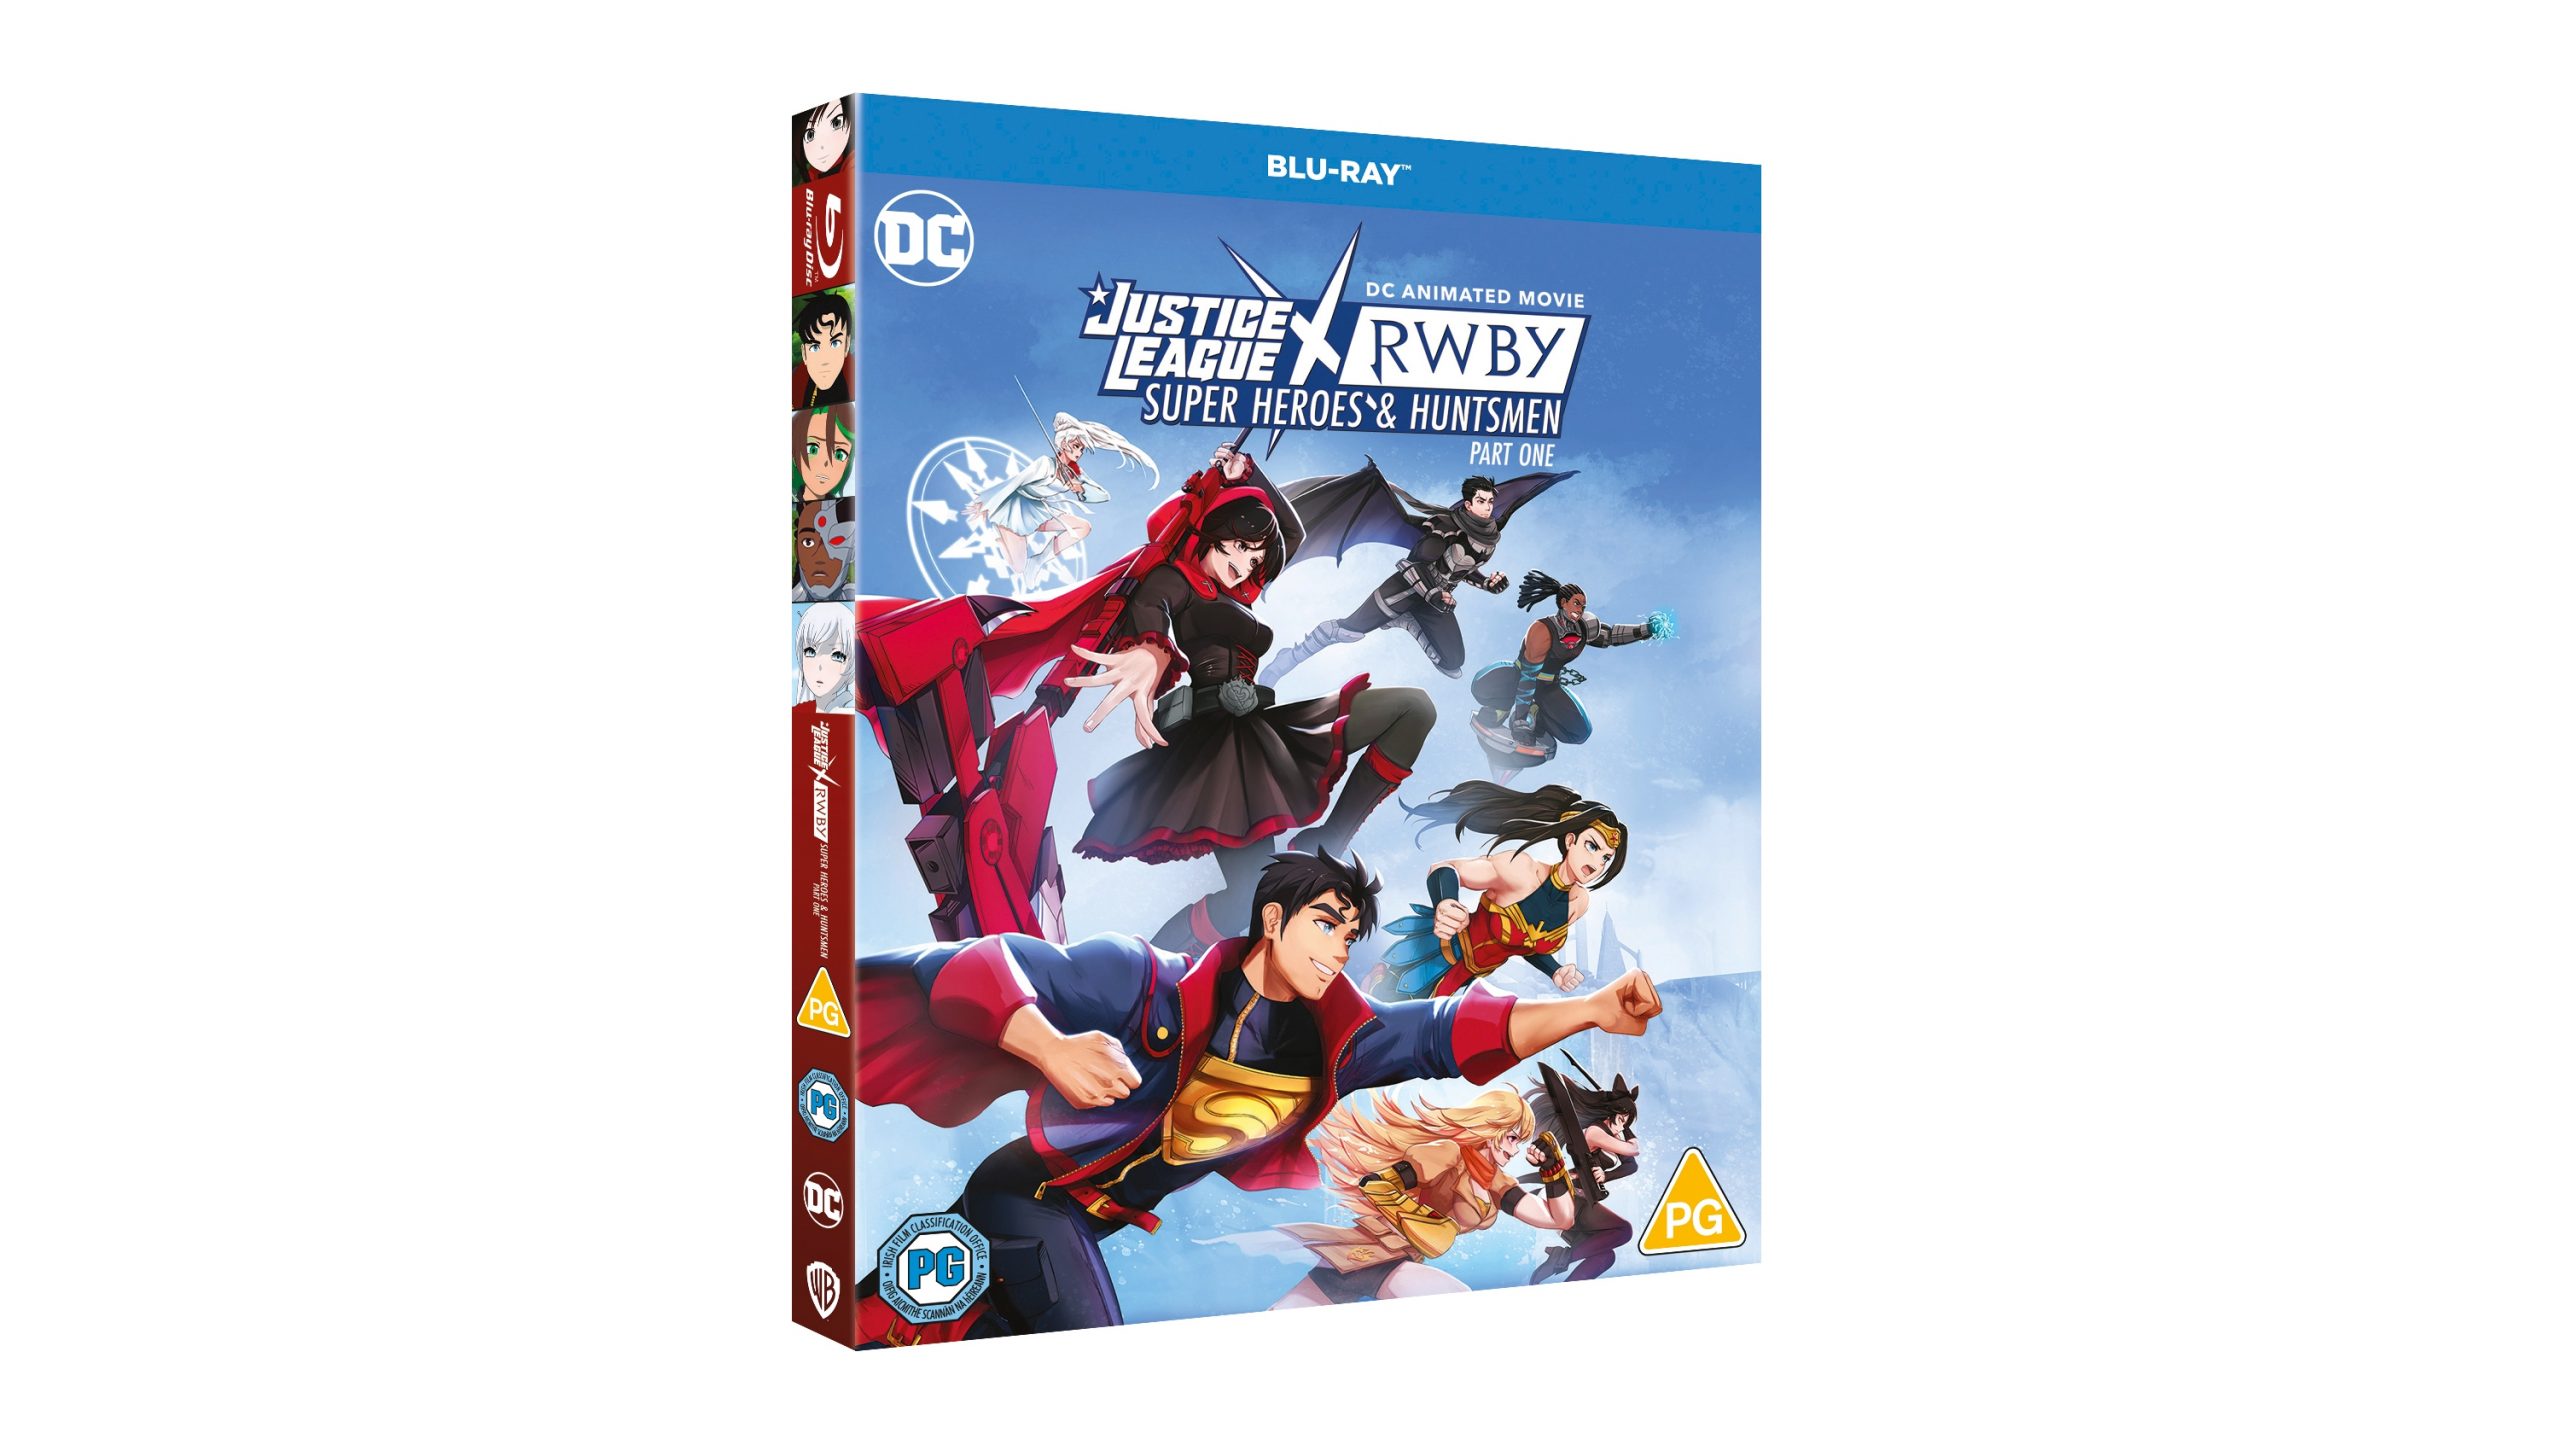 Justice League x RWBY: Super Heroes & Huntsmen, Part One on Blu-Ray